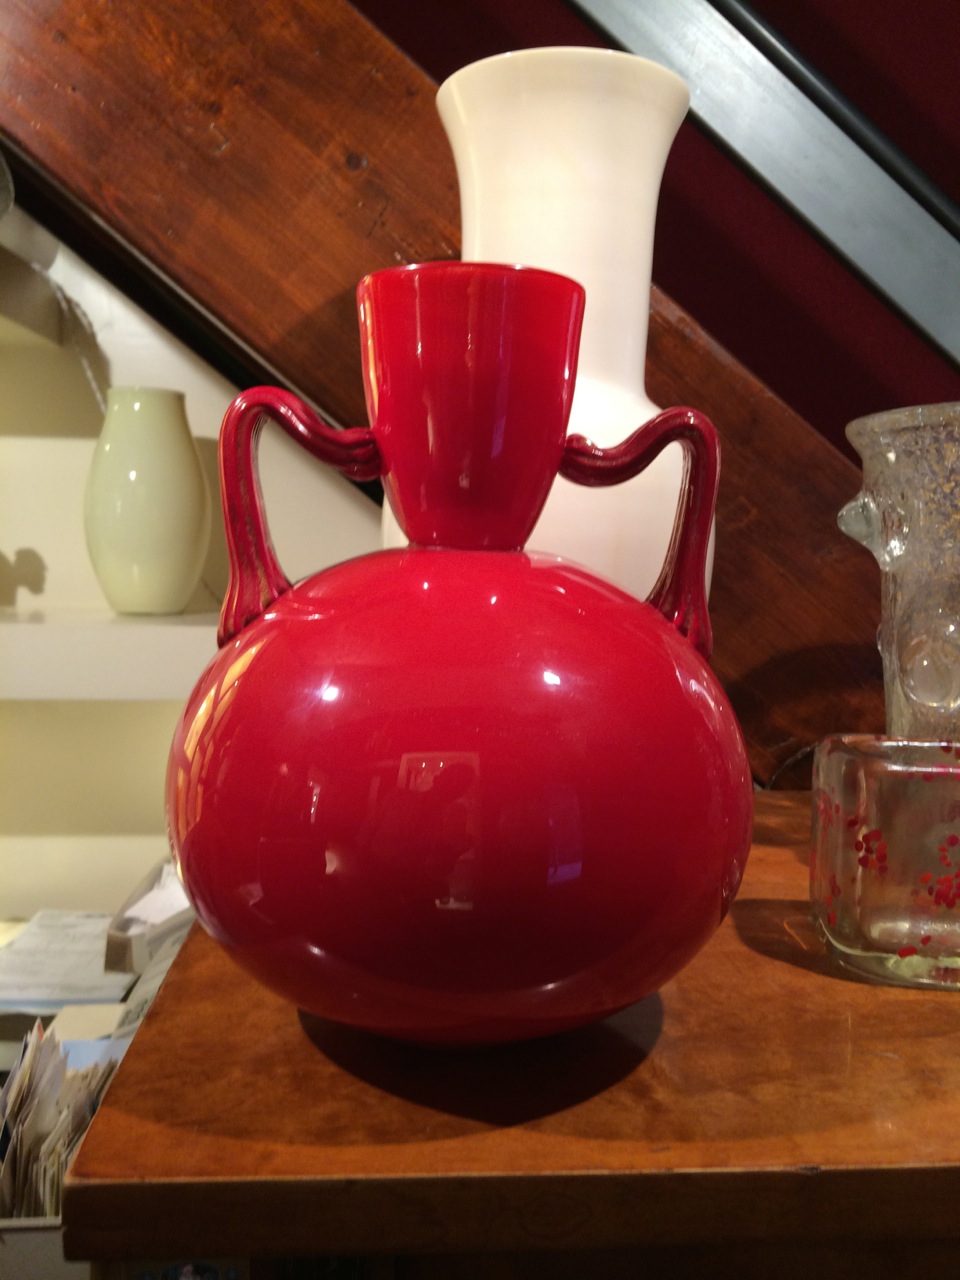 The Roger Thomas Collection Blog - Seeing red for Valentine's